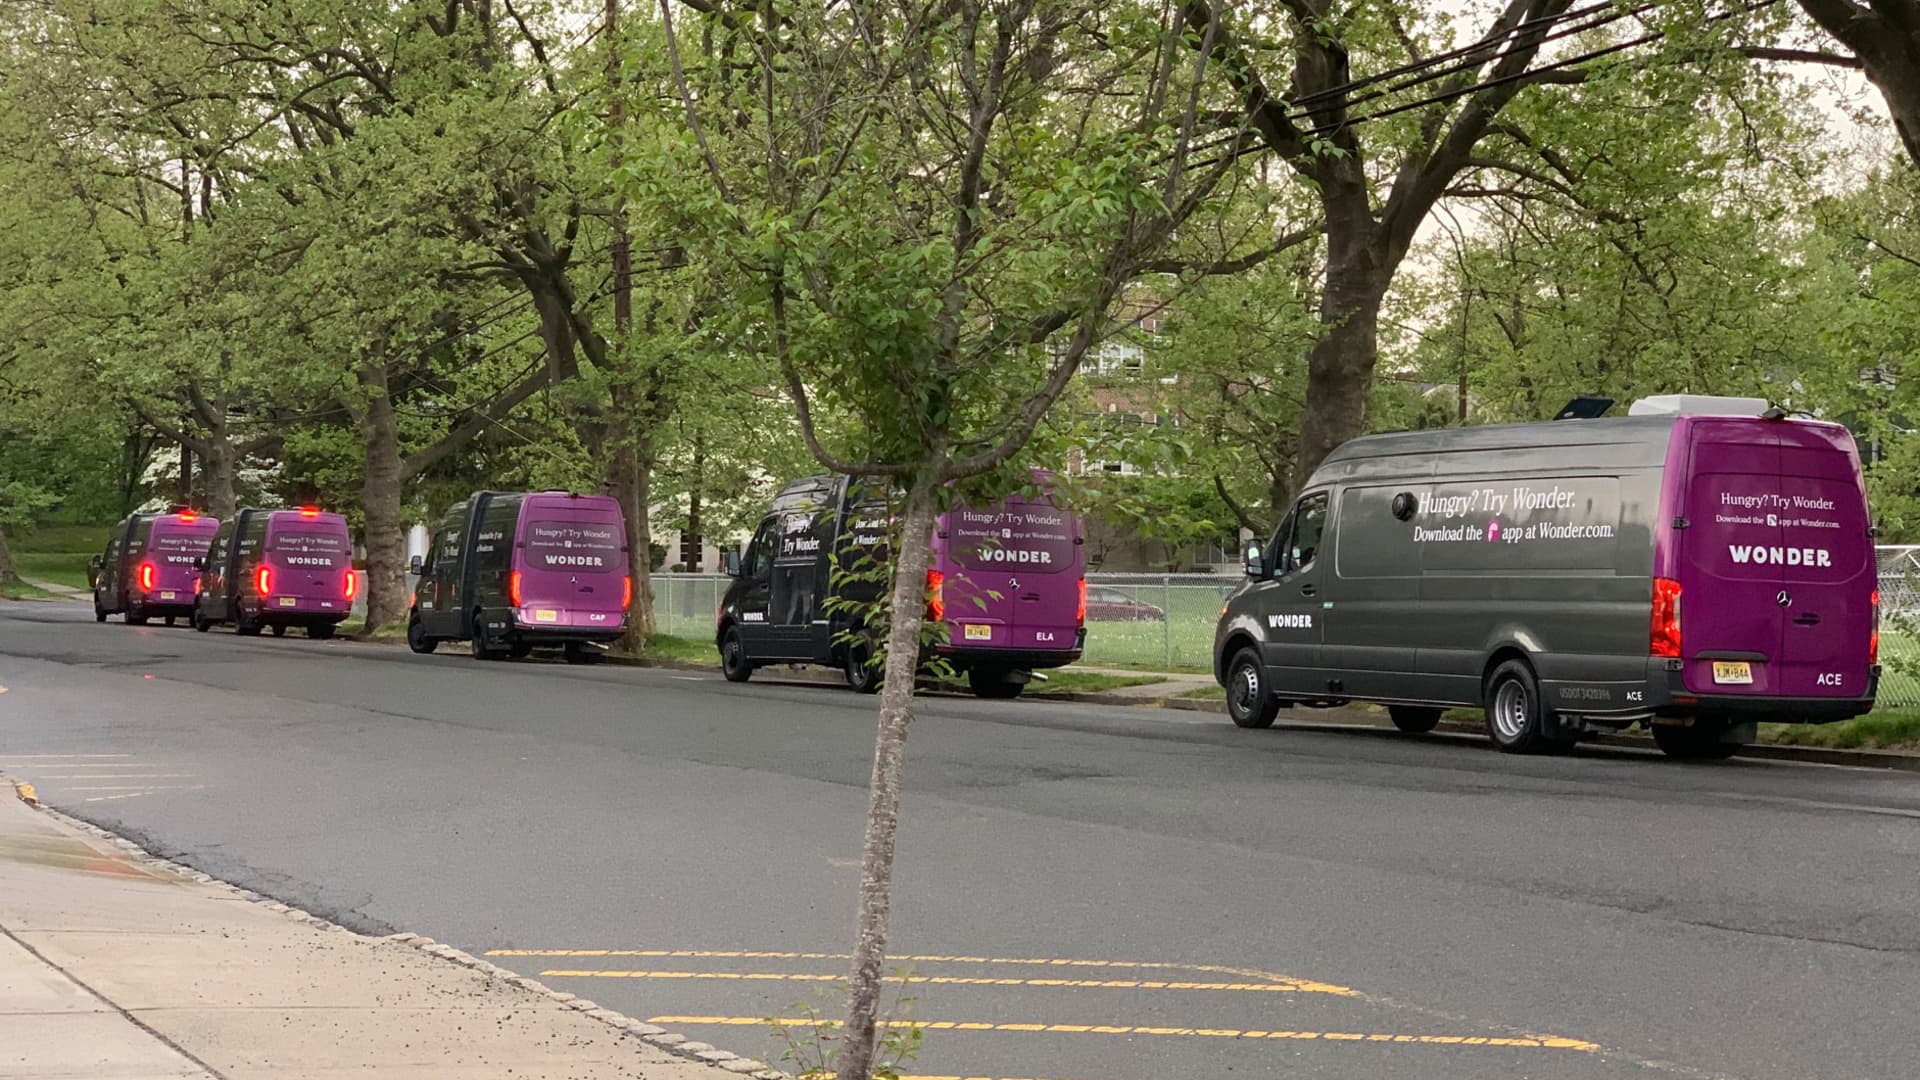 The Wonder vans, seen here lined along Elm Street in Westfield, New Jersey, have become ubiquitous in the affluent town where the company is piloting its business.